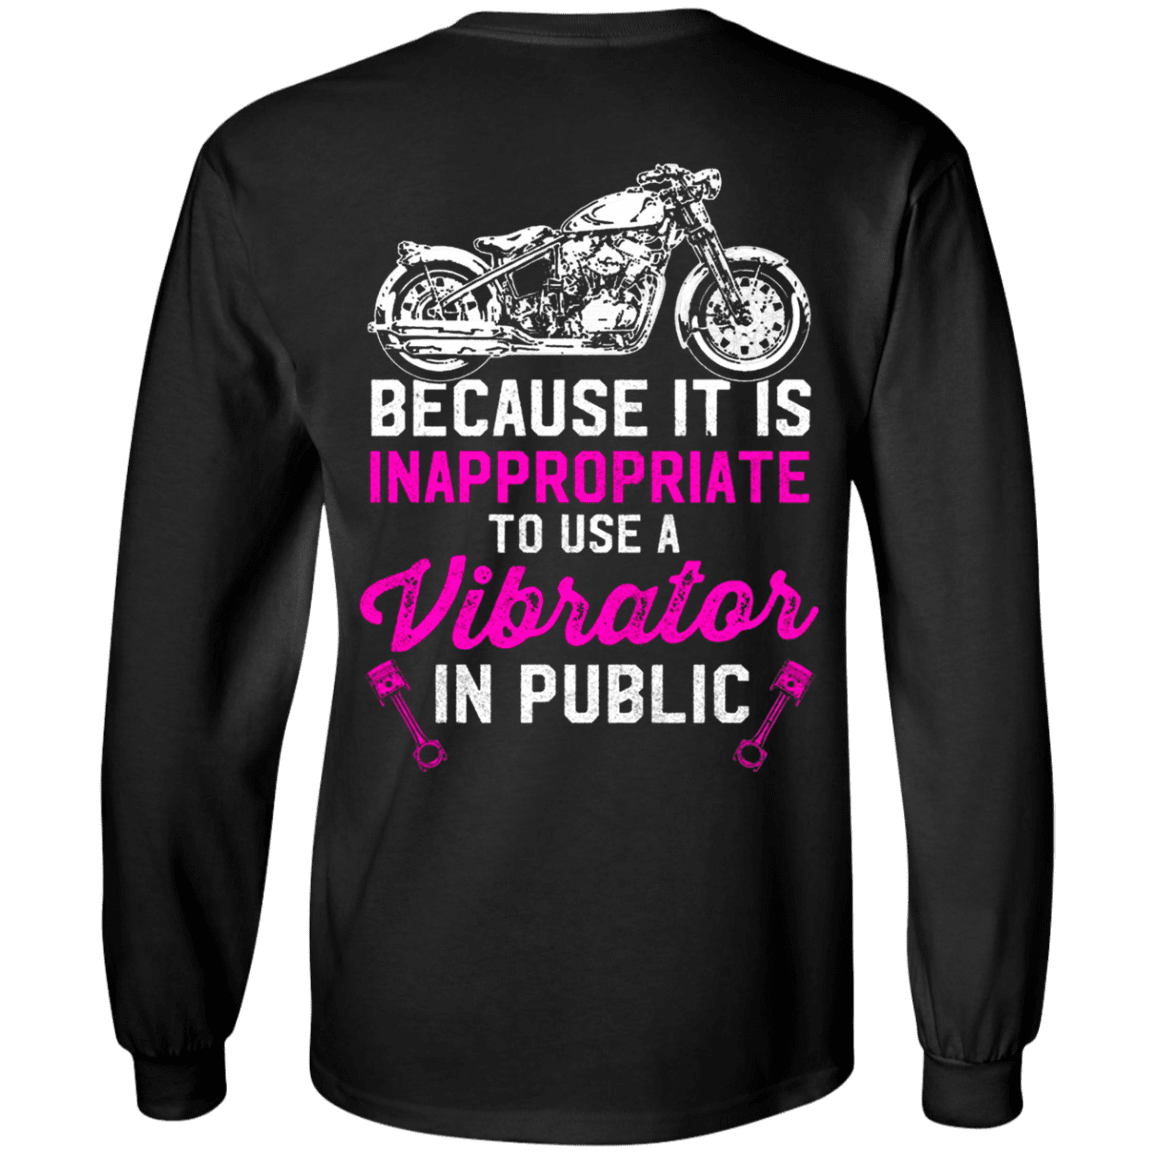 Because It Is Inappropriate To Use Vibrator In Public Long Sleeve T-Shirt, Cotton, Black - American Legend Rider